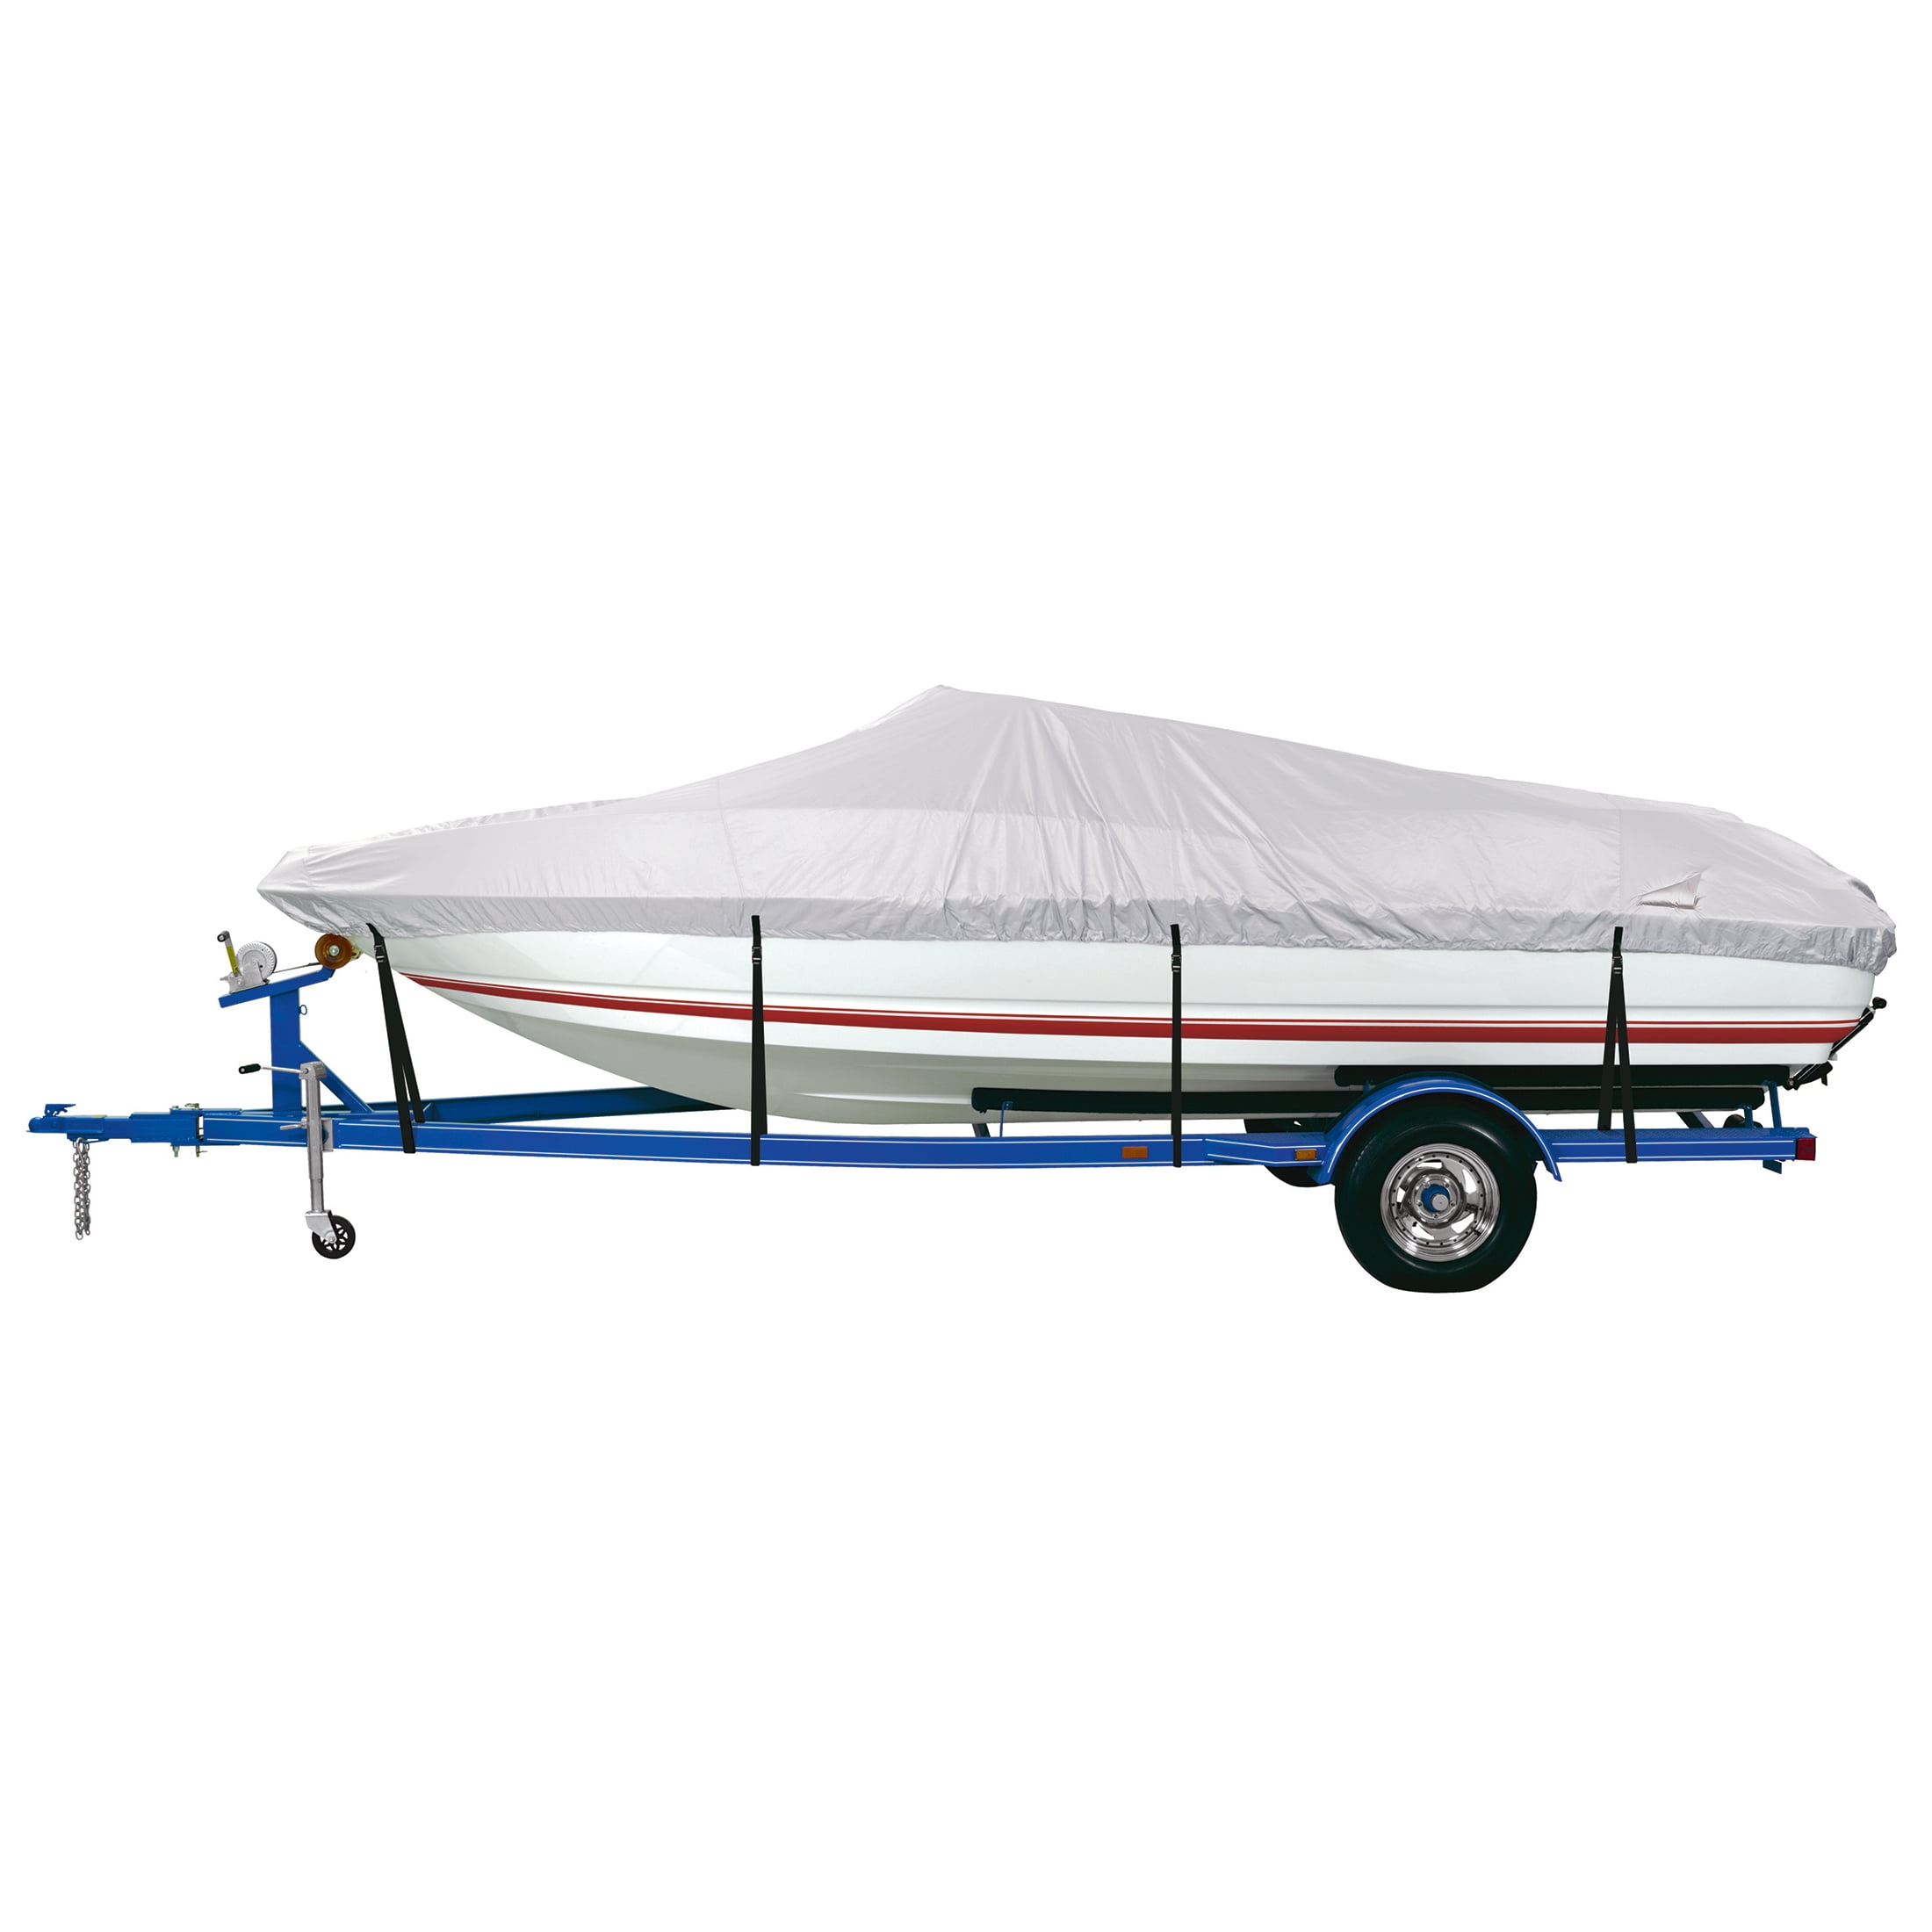 Black, Model A - Length:14-16 Beam Width: up to 68 MSC Heavy Duty 600D Marine Grade Polyester Canvas Trailerable Waterproof Boat Cover,Fits V-Hull,Tri-Hull Runabout Boat Cover